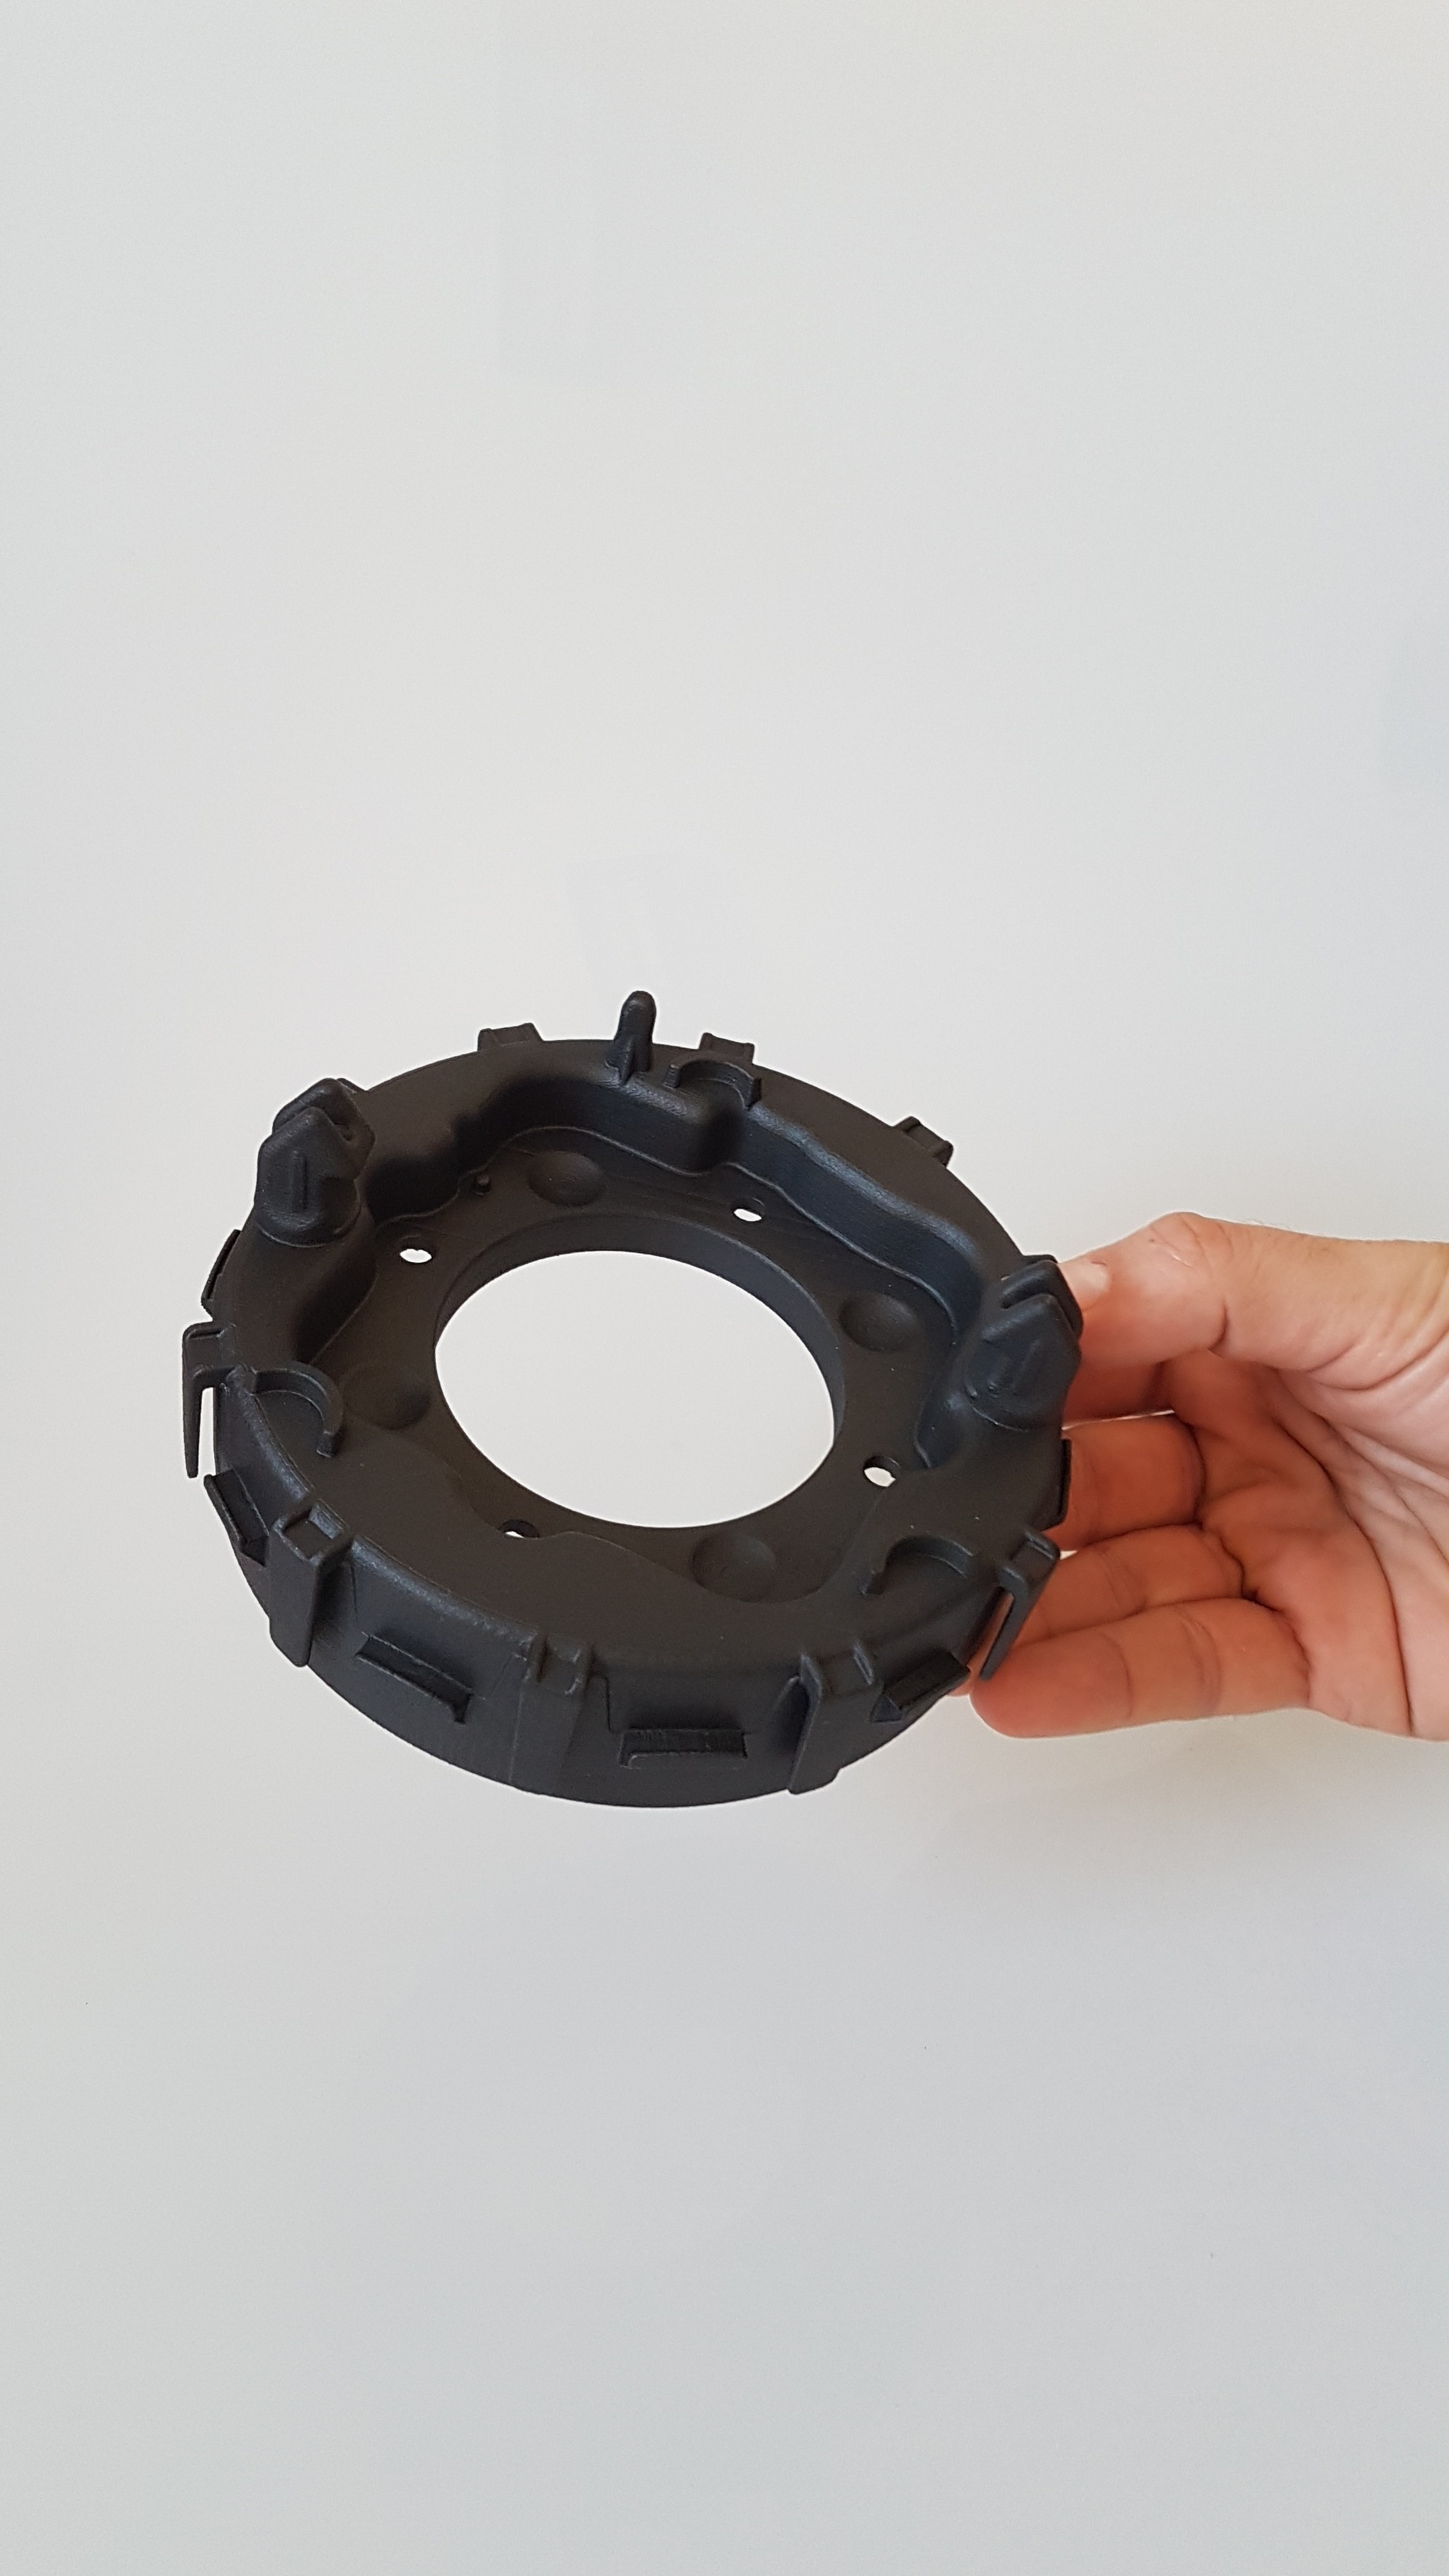 3D printed Driver Airbag (DAB) housing in Windform® SP manufactured via Laser Sintering process. Photo via CRP Technology